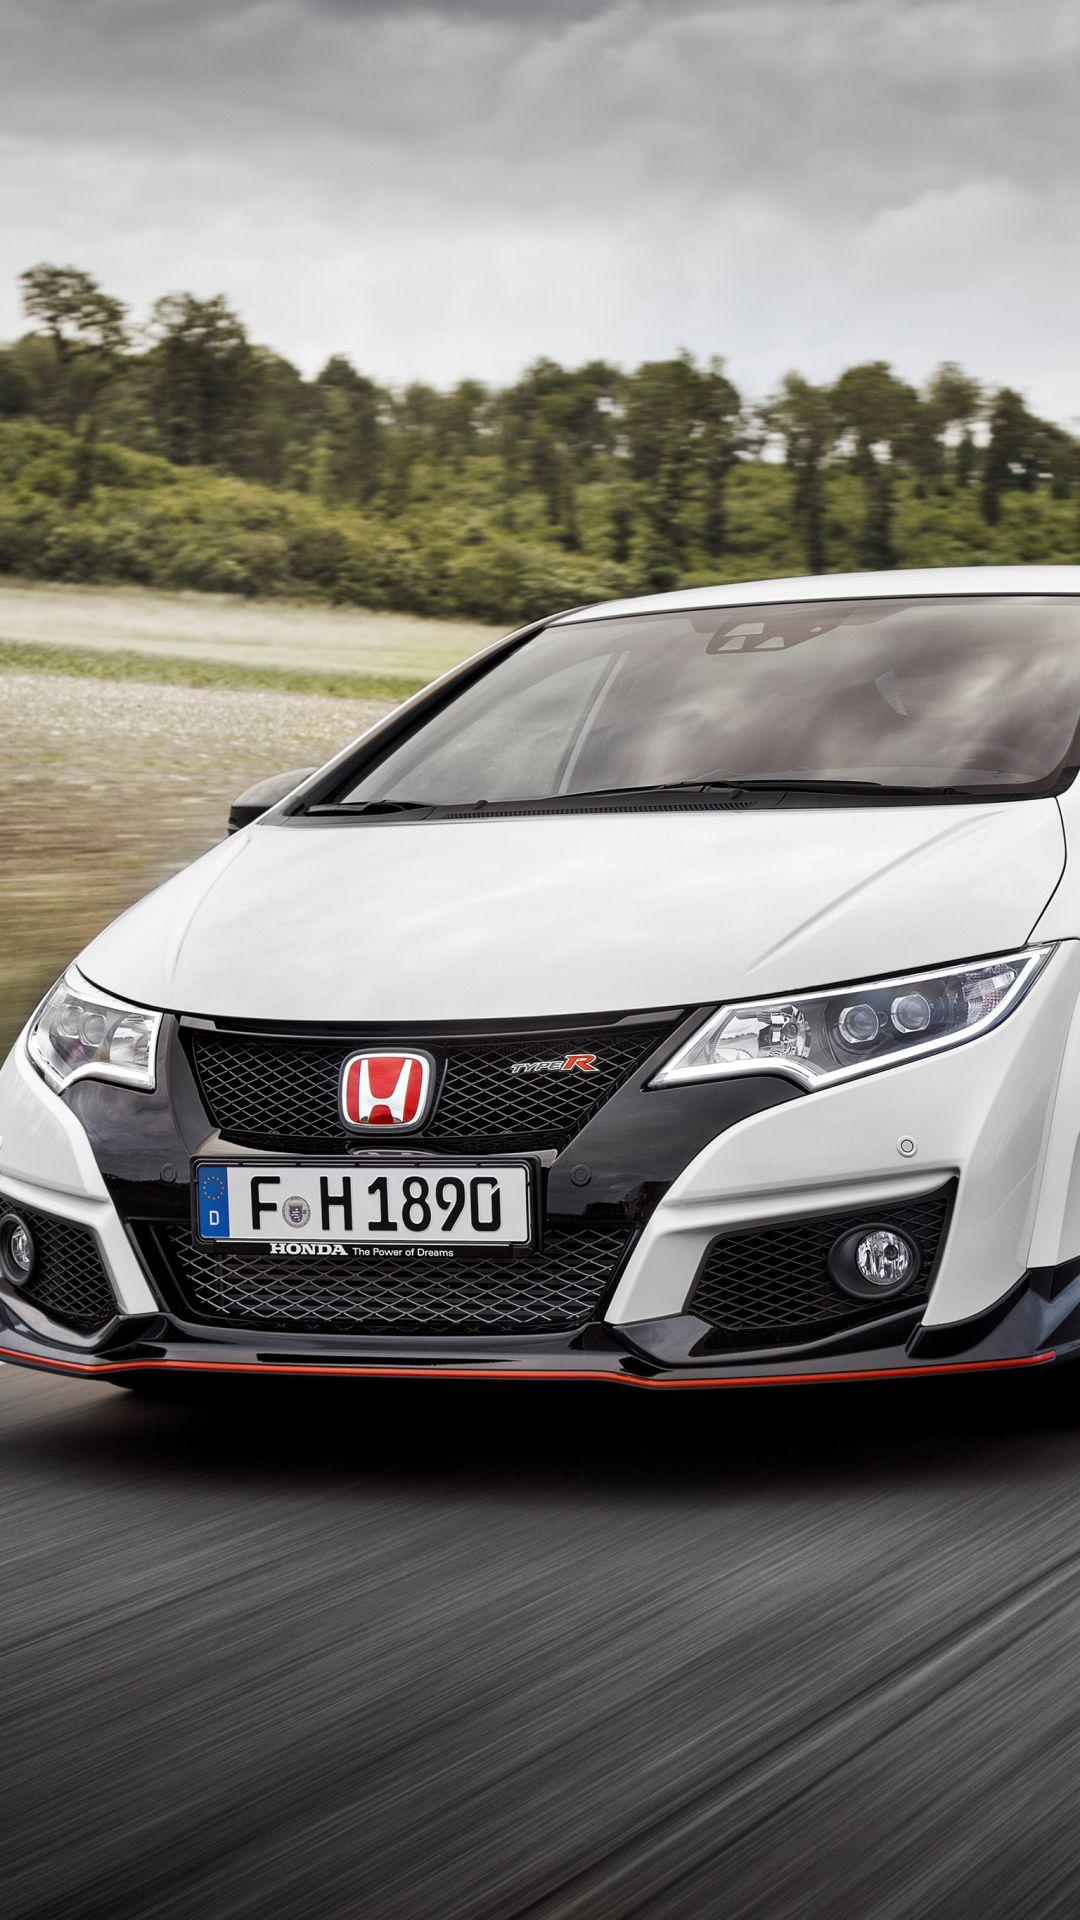 Jesper's Civic Type R: A simple functional build – BECAUSE RACE CAR